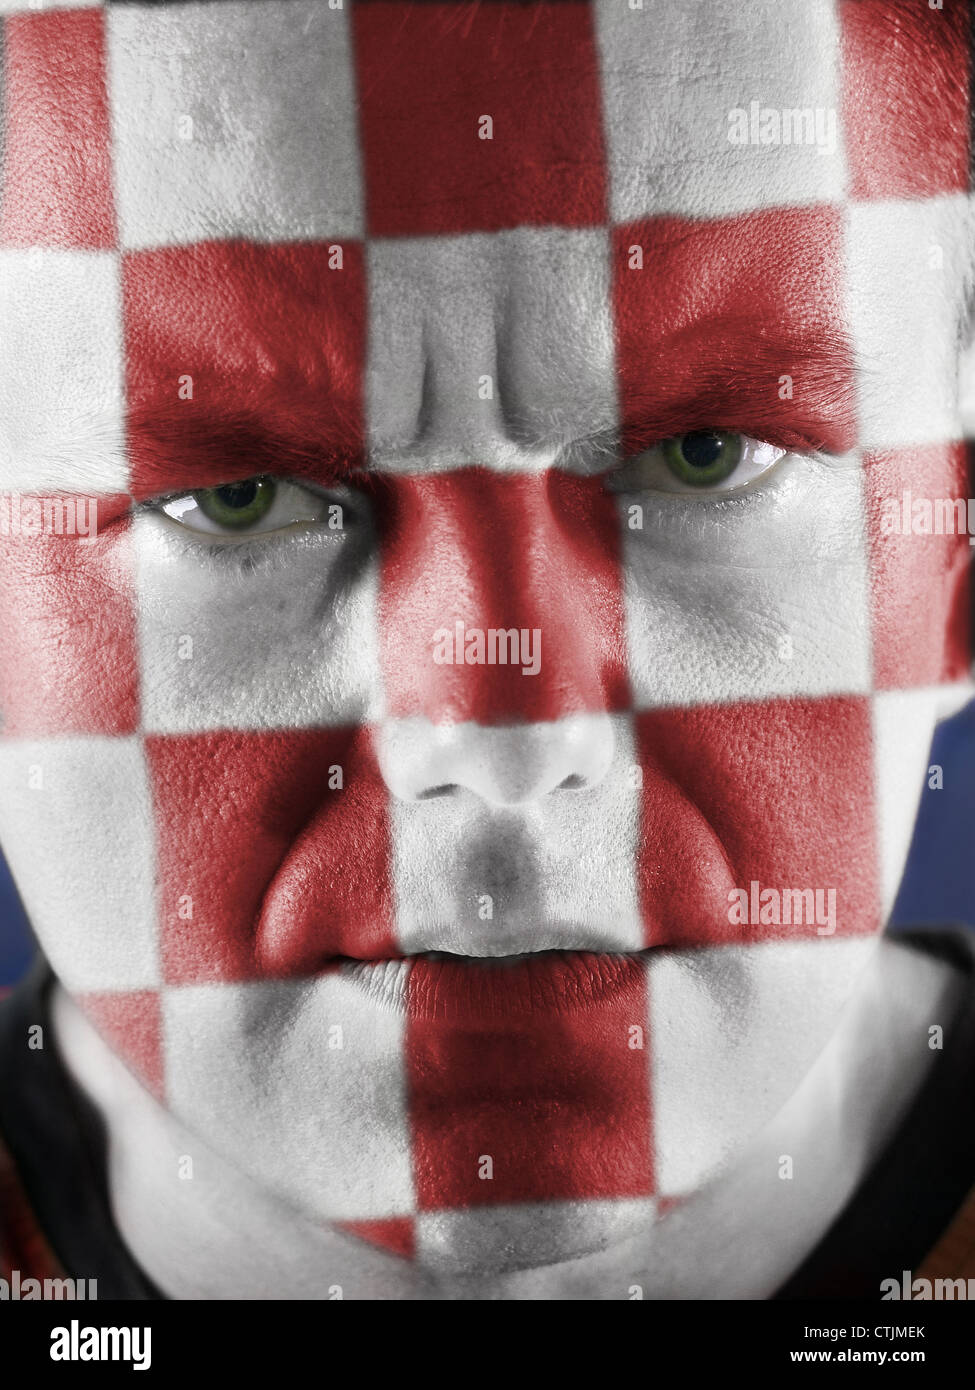 Closeup of young Croatian supporter face painted with red and white checker pattern Stock Photo